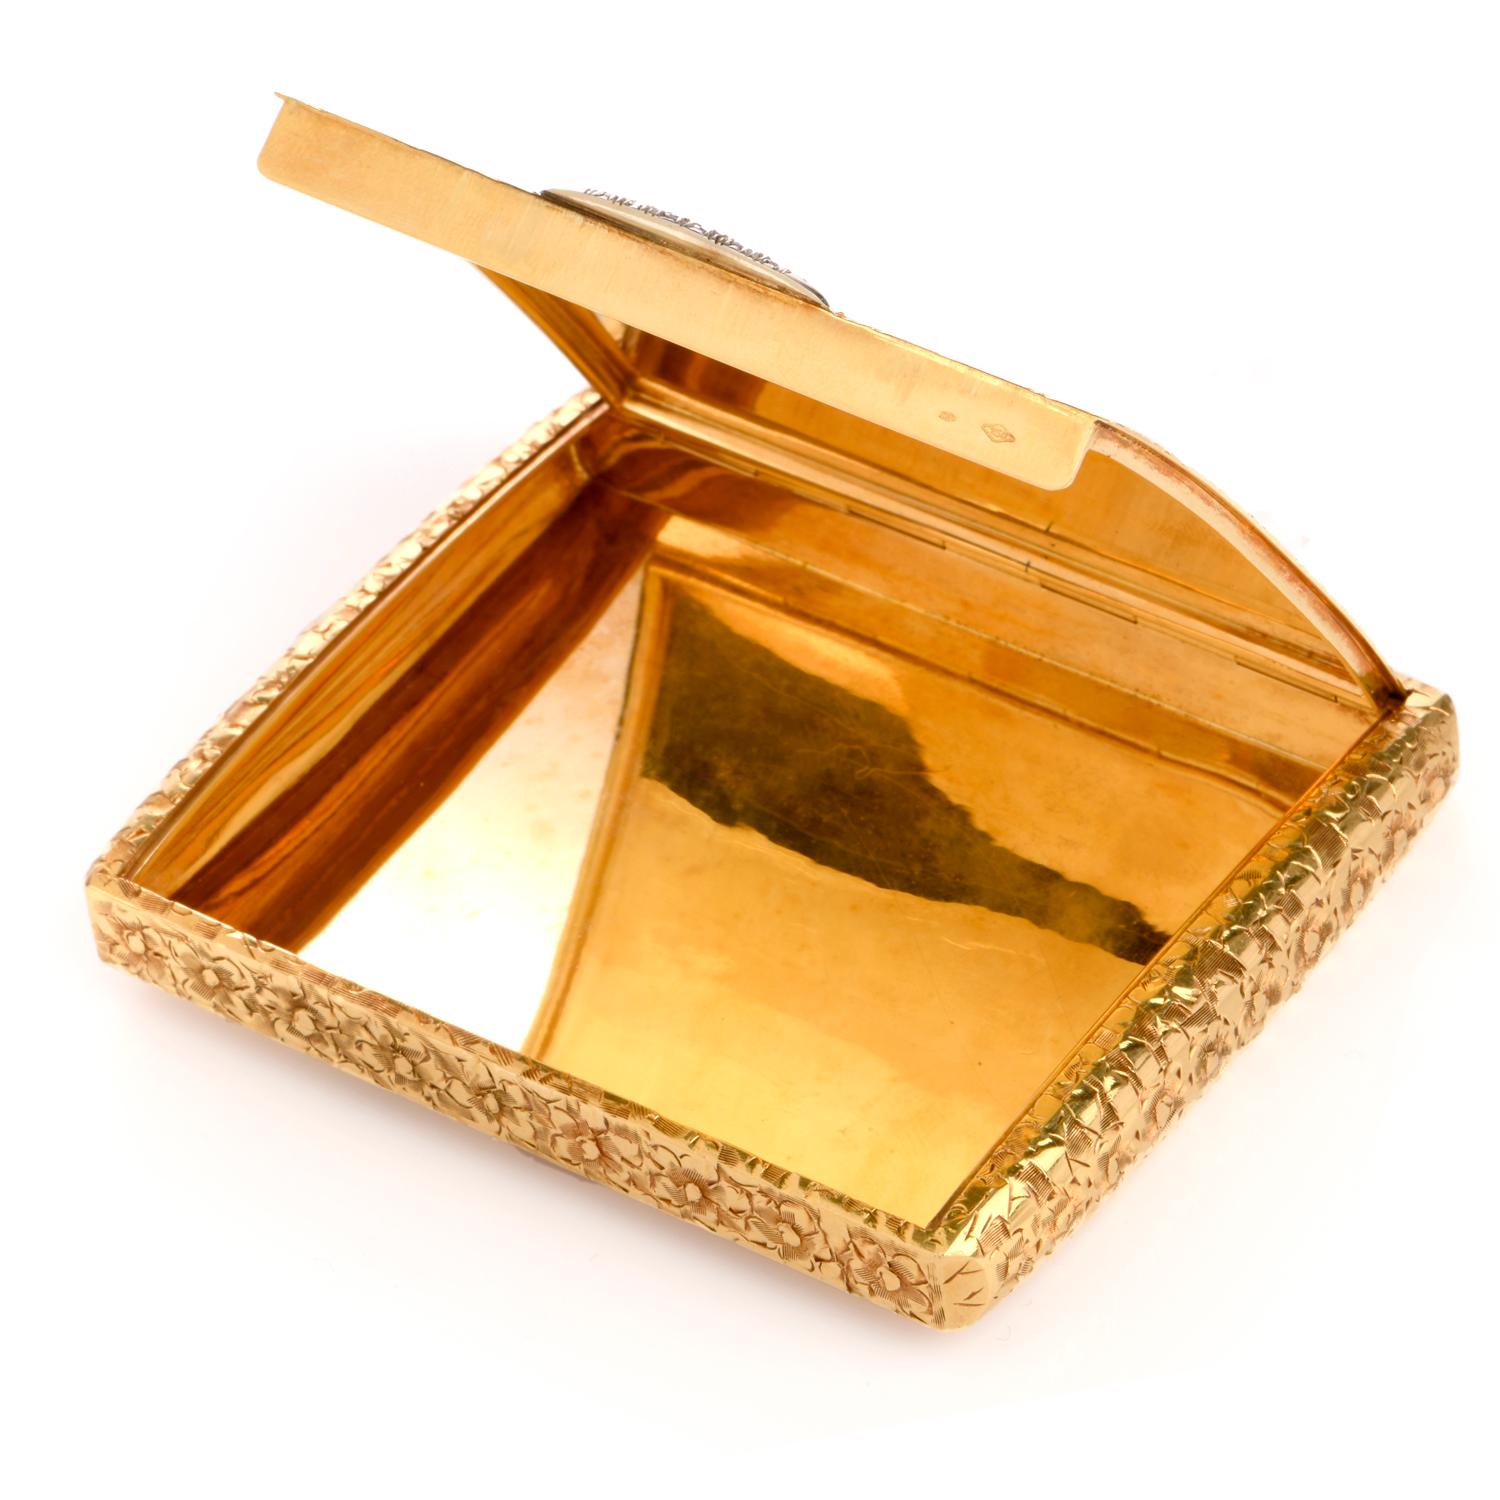 This vintage 1960's floral diamond compact box is crafted in solid 18-karat yellow gold it can be used to store your bussines cards or you pills, weighing 100.5 grams and measuring 3.50